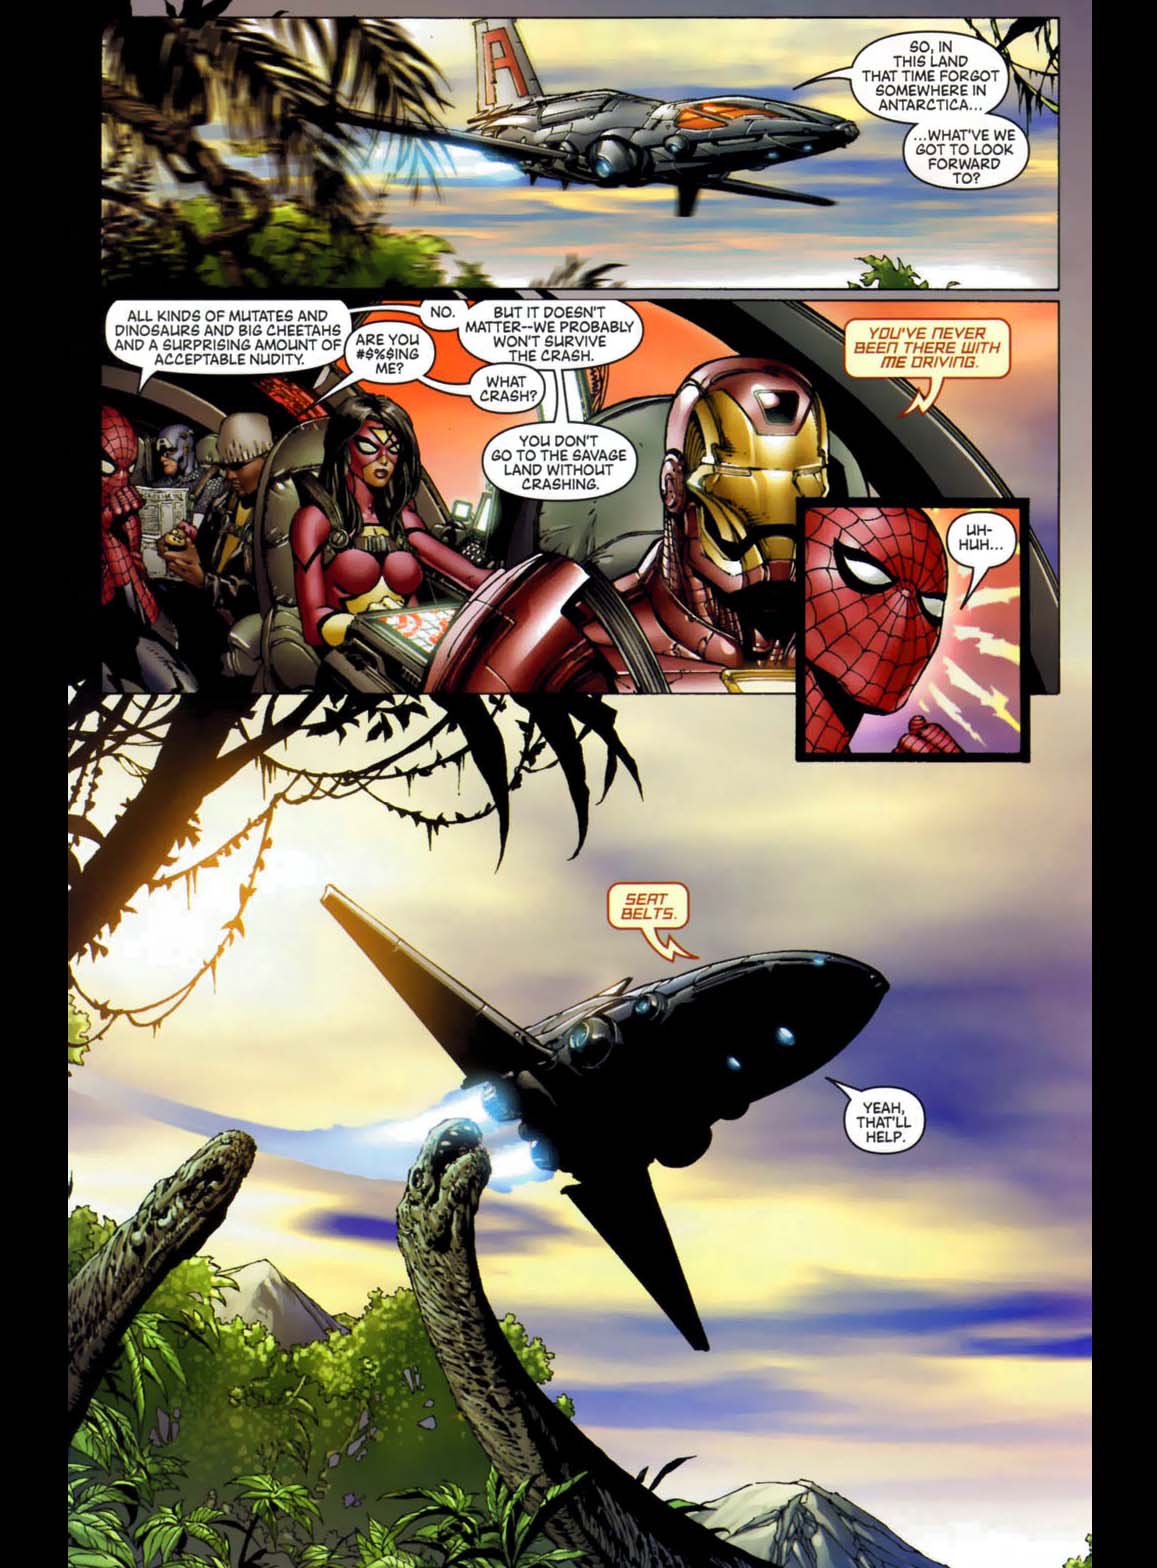 What To Expect In The Savage Land